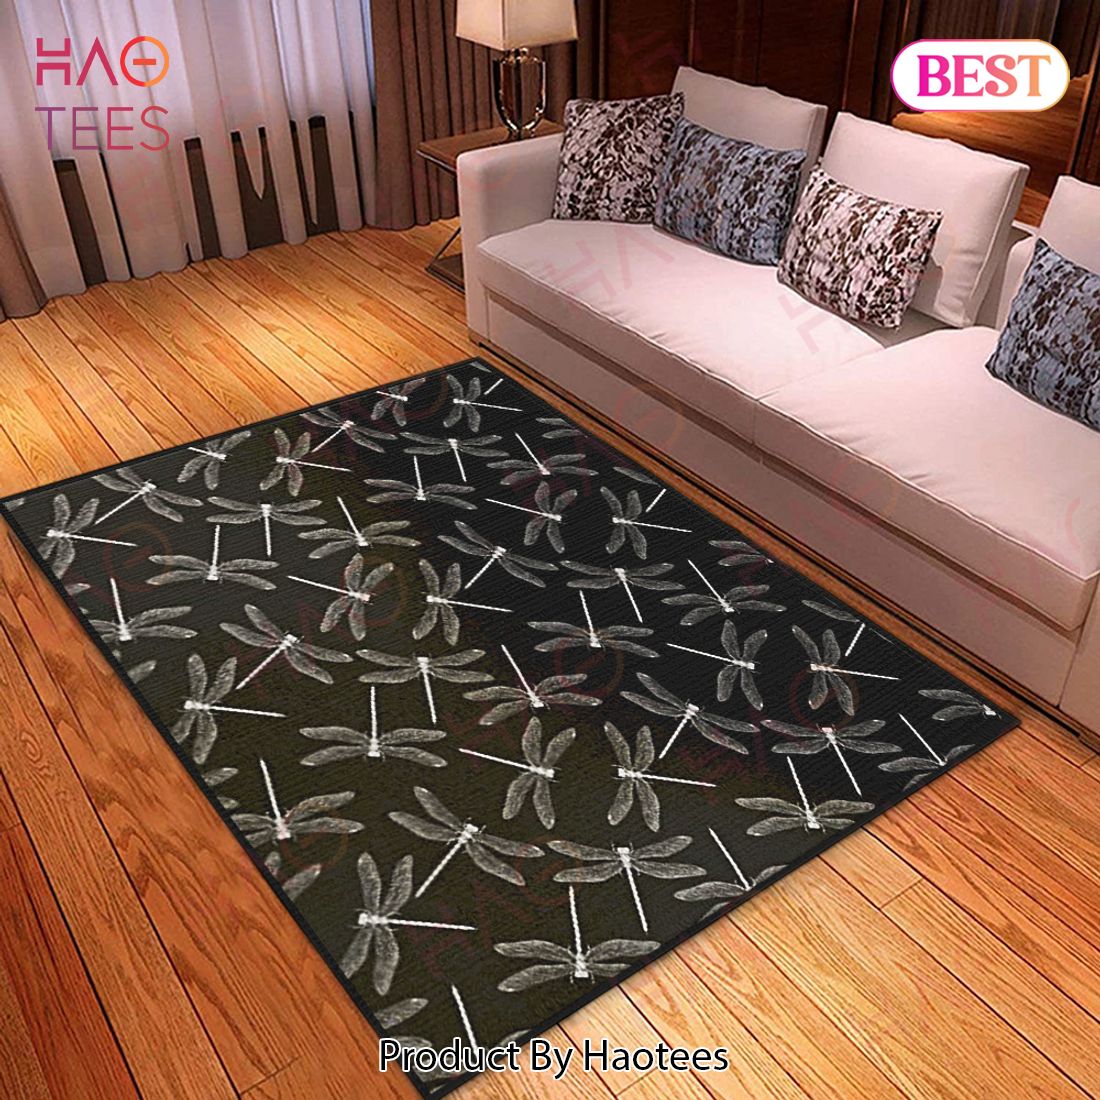 Silver Dragonfly Area Rugs Carpet Mat Kitchen Rugs Floor Decor